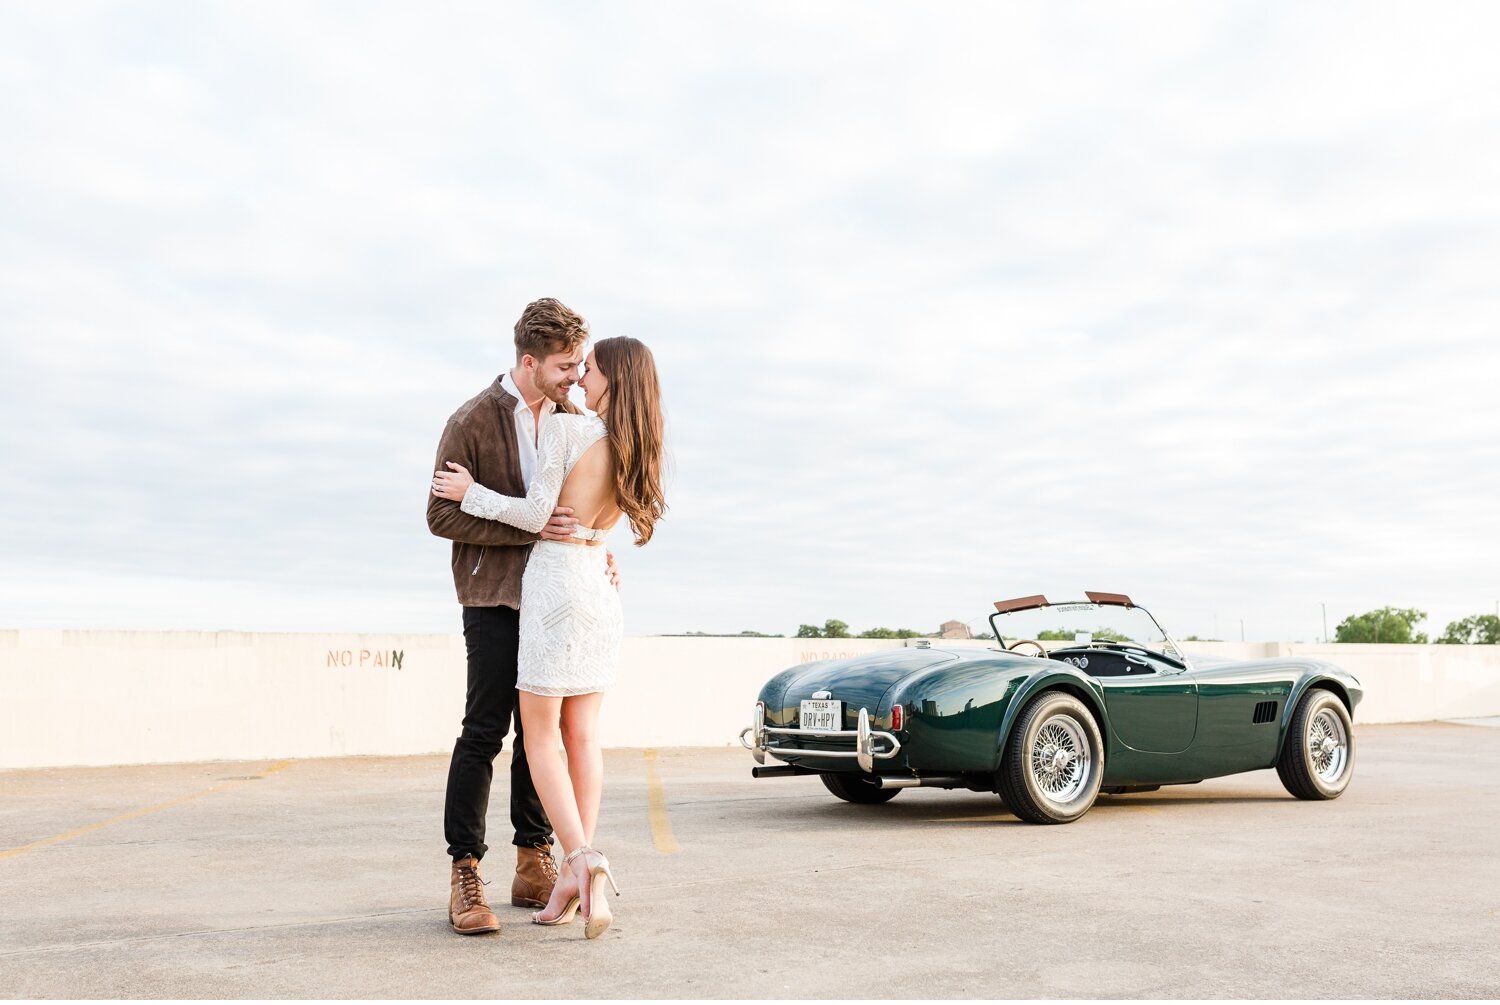 London + Christian Downtown Austin Rooftop Classic Car Engagement Session_0019.jpg